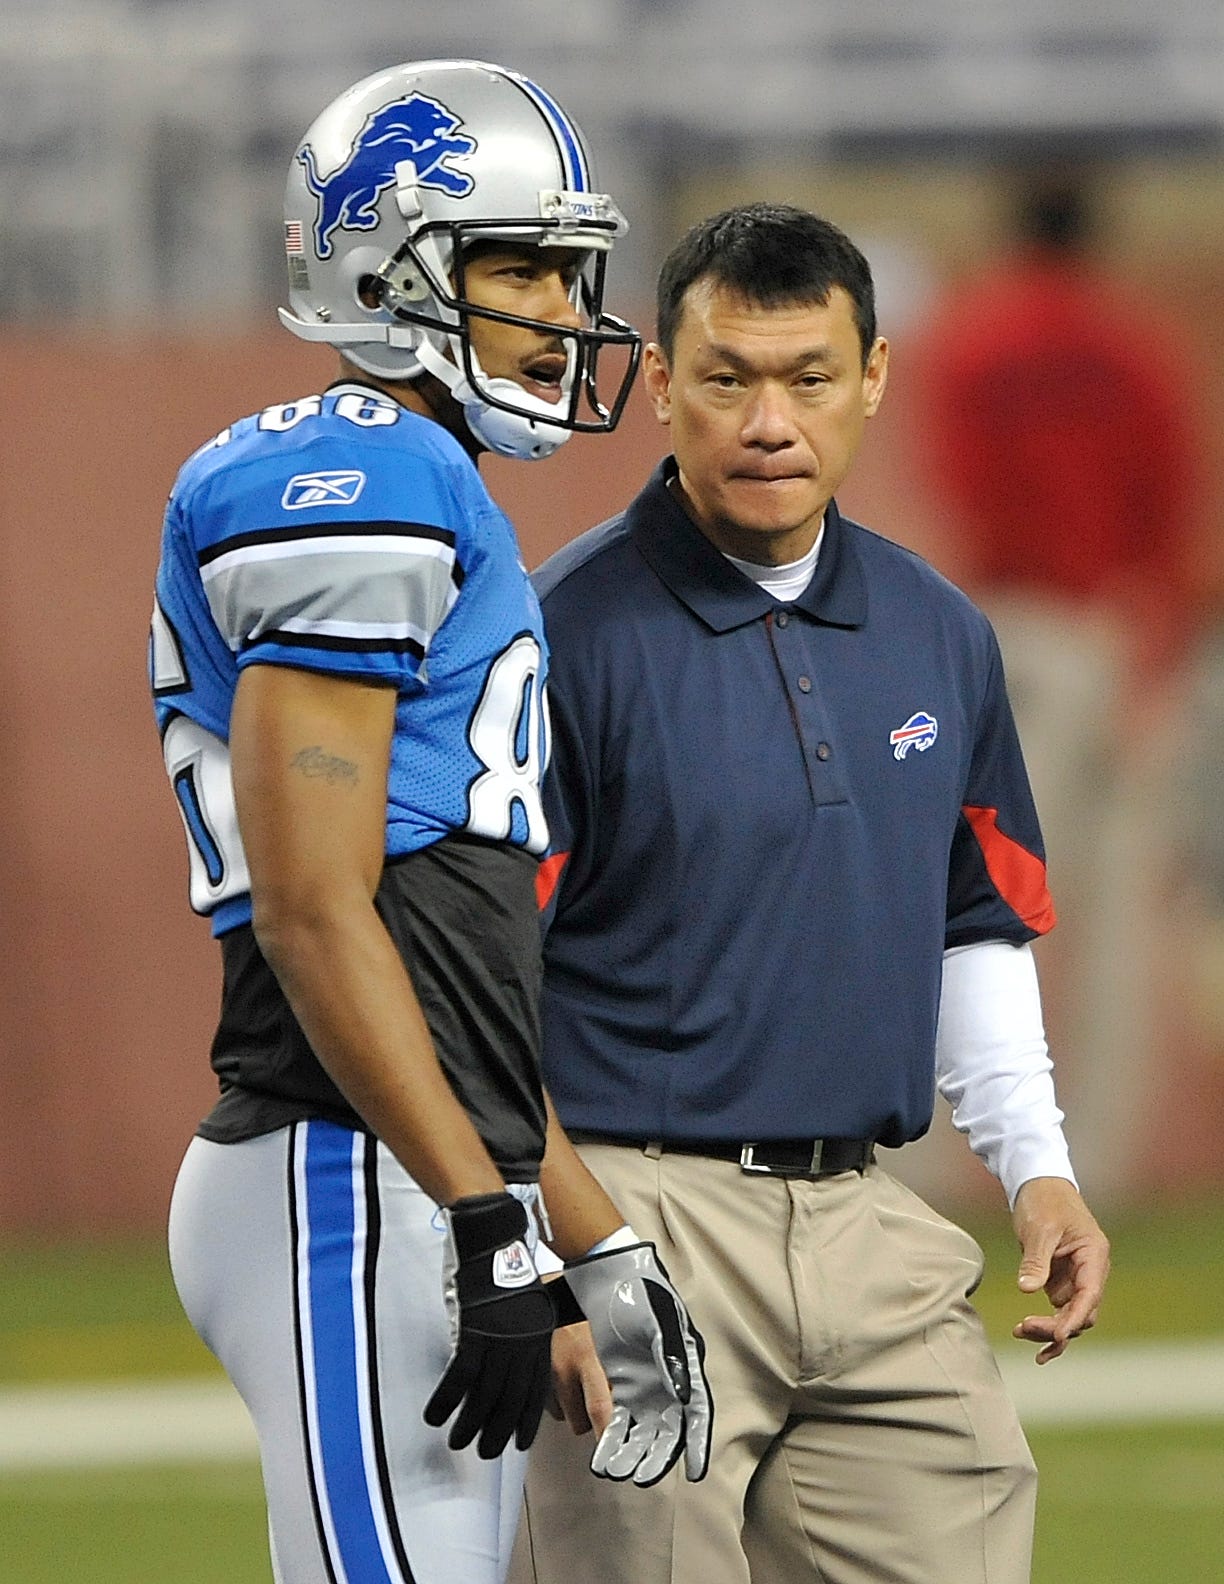 Former Detroit Lions special teams coordinator Stan Kwan, shown here as a member of the Bills coaching staff in 2010, passed away this week, he was 54.